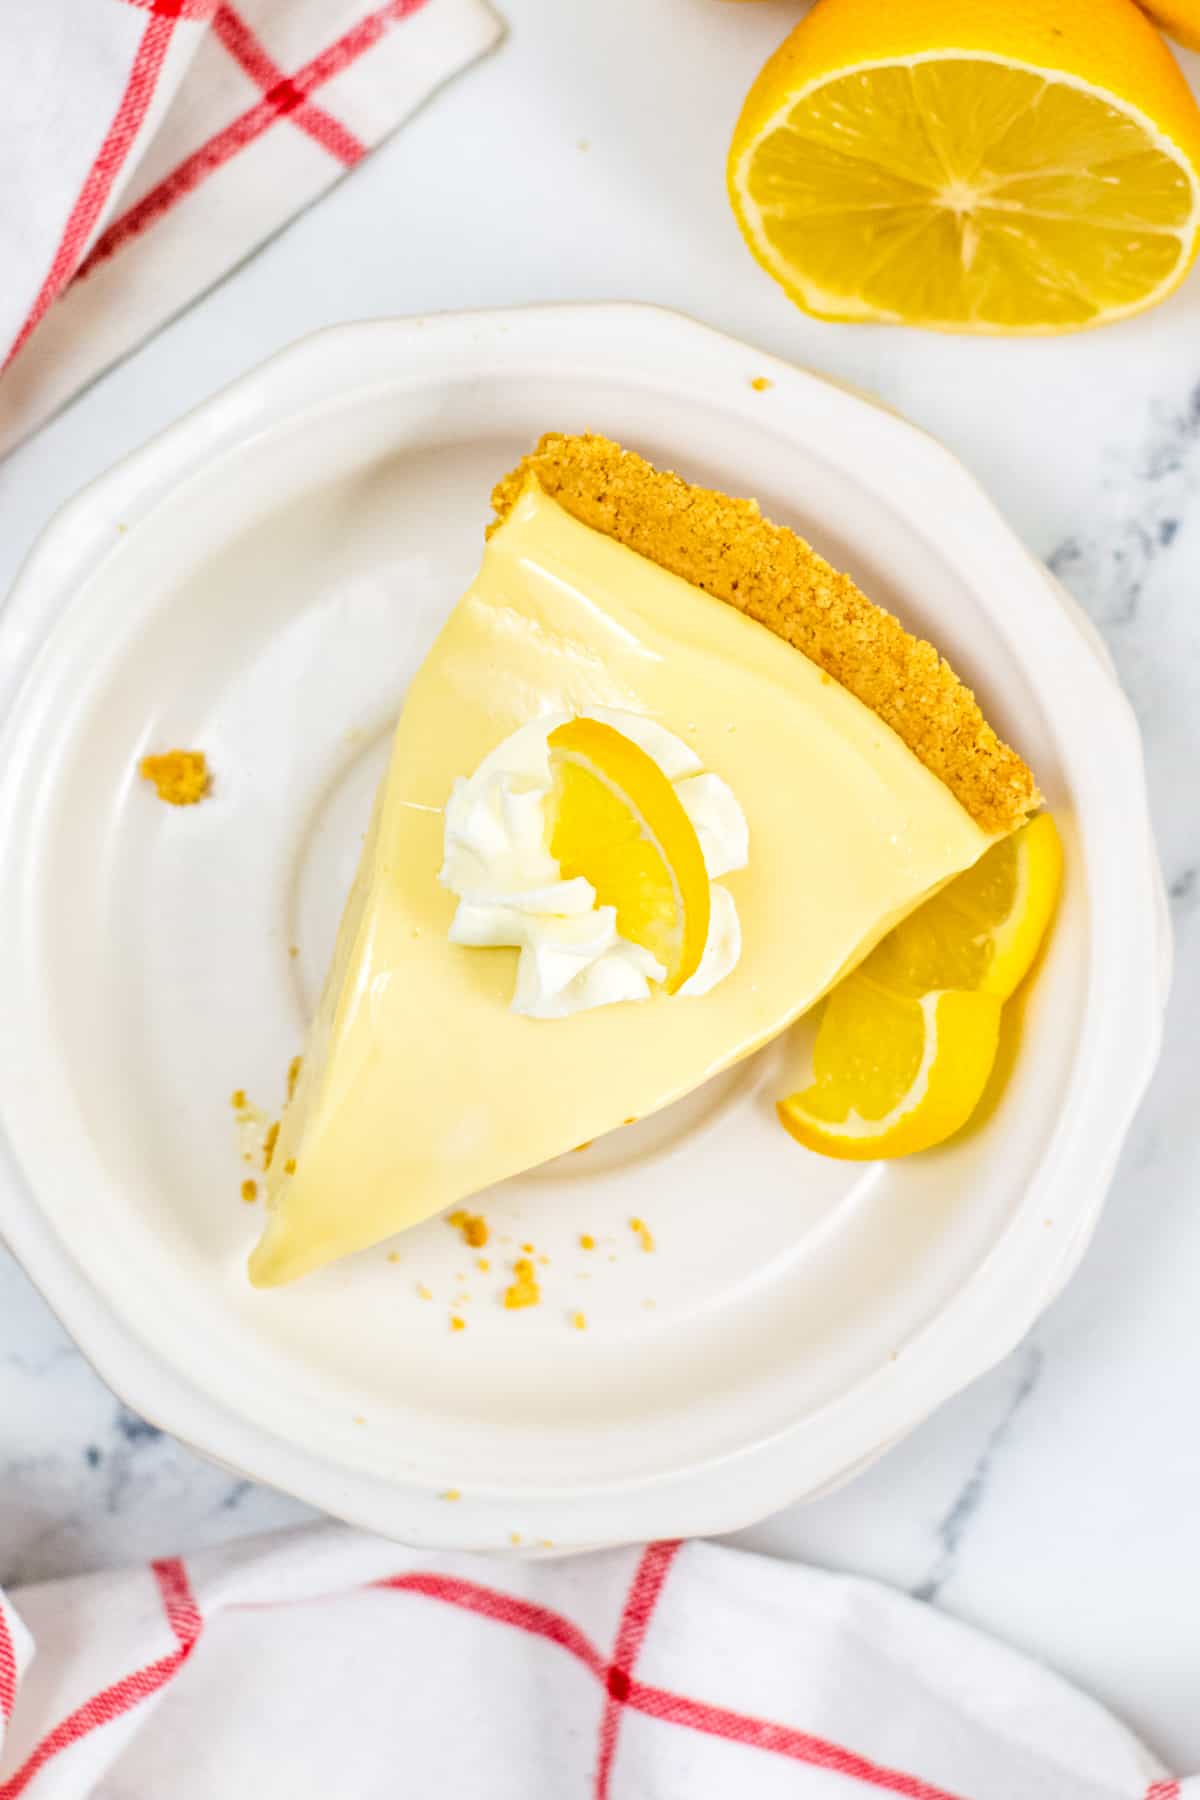 Slice of no-bake lemon pie with graham cracker crust and dollop of whipped cream